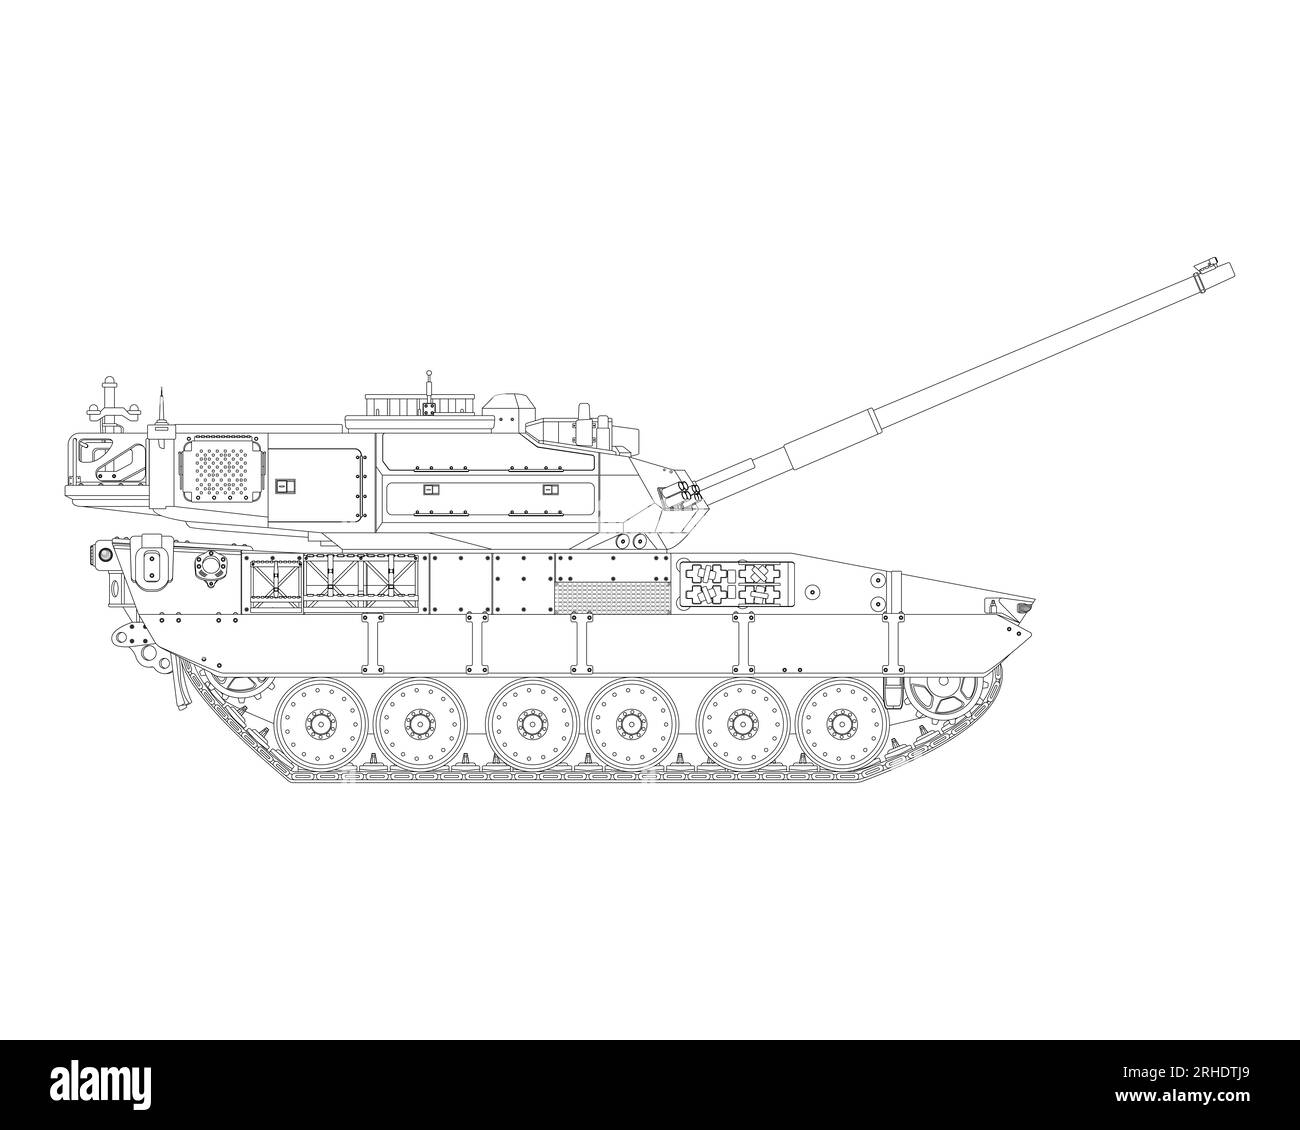 Main battle tank in line art. Raised barrel. Armored military vehicle. Detailed illustration isolated on white background. Stock Photo